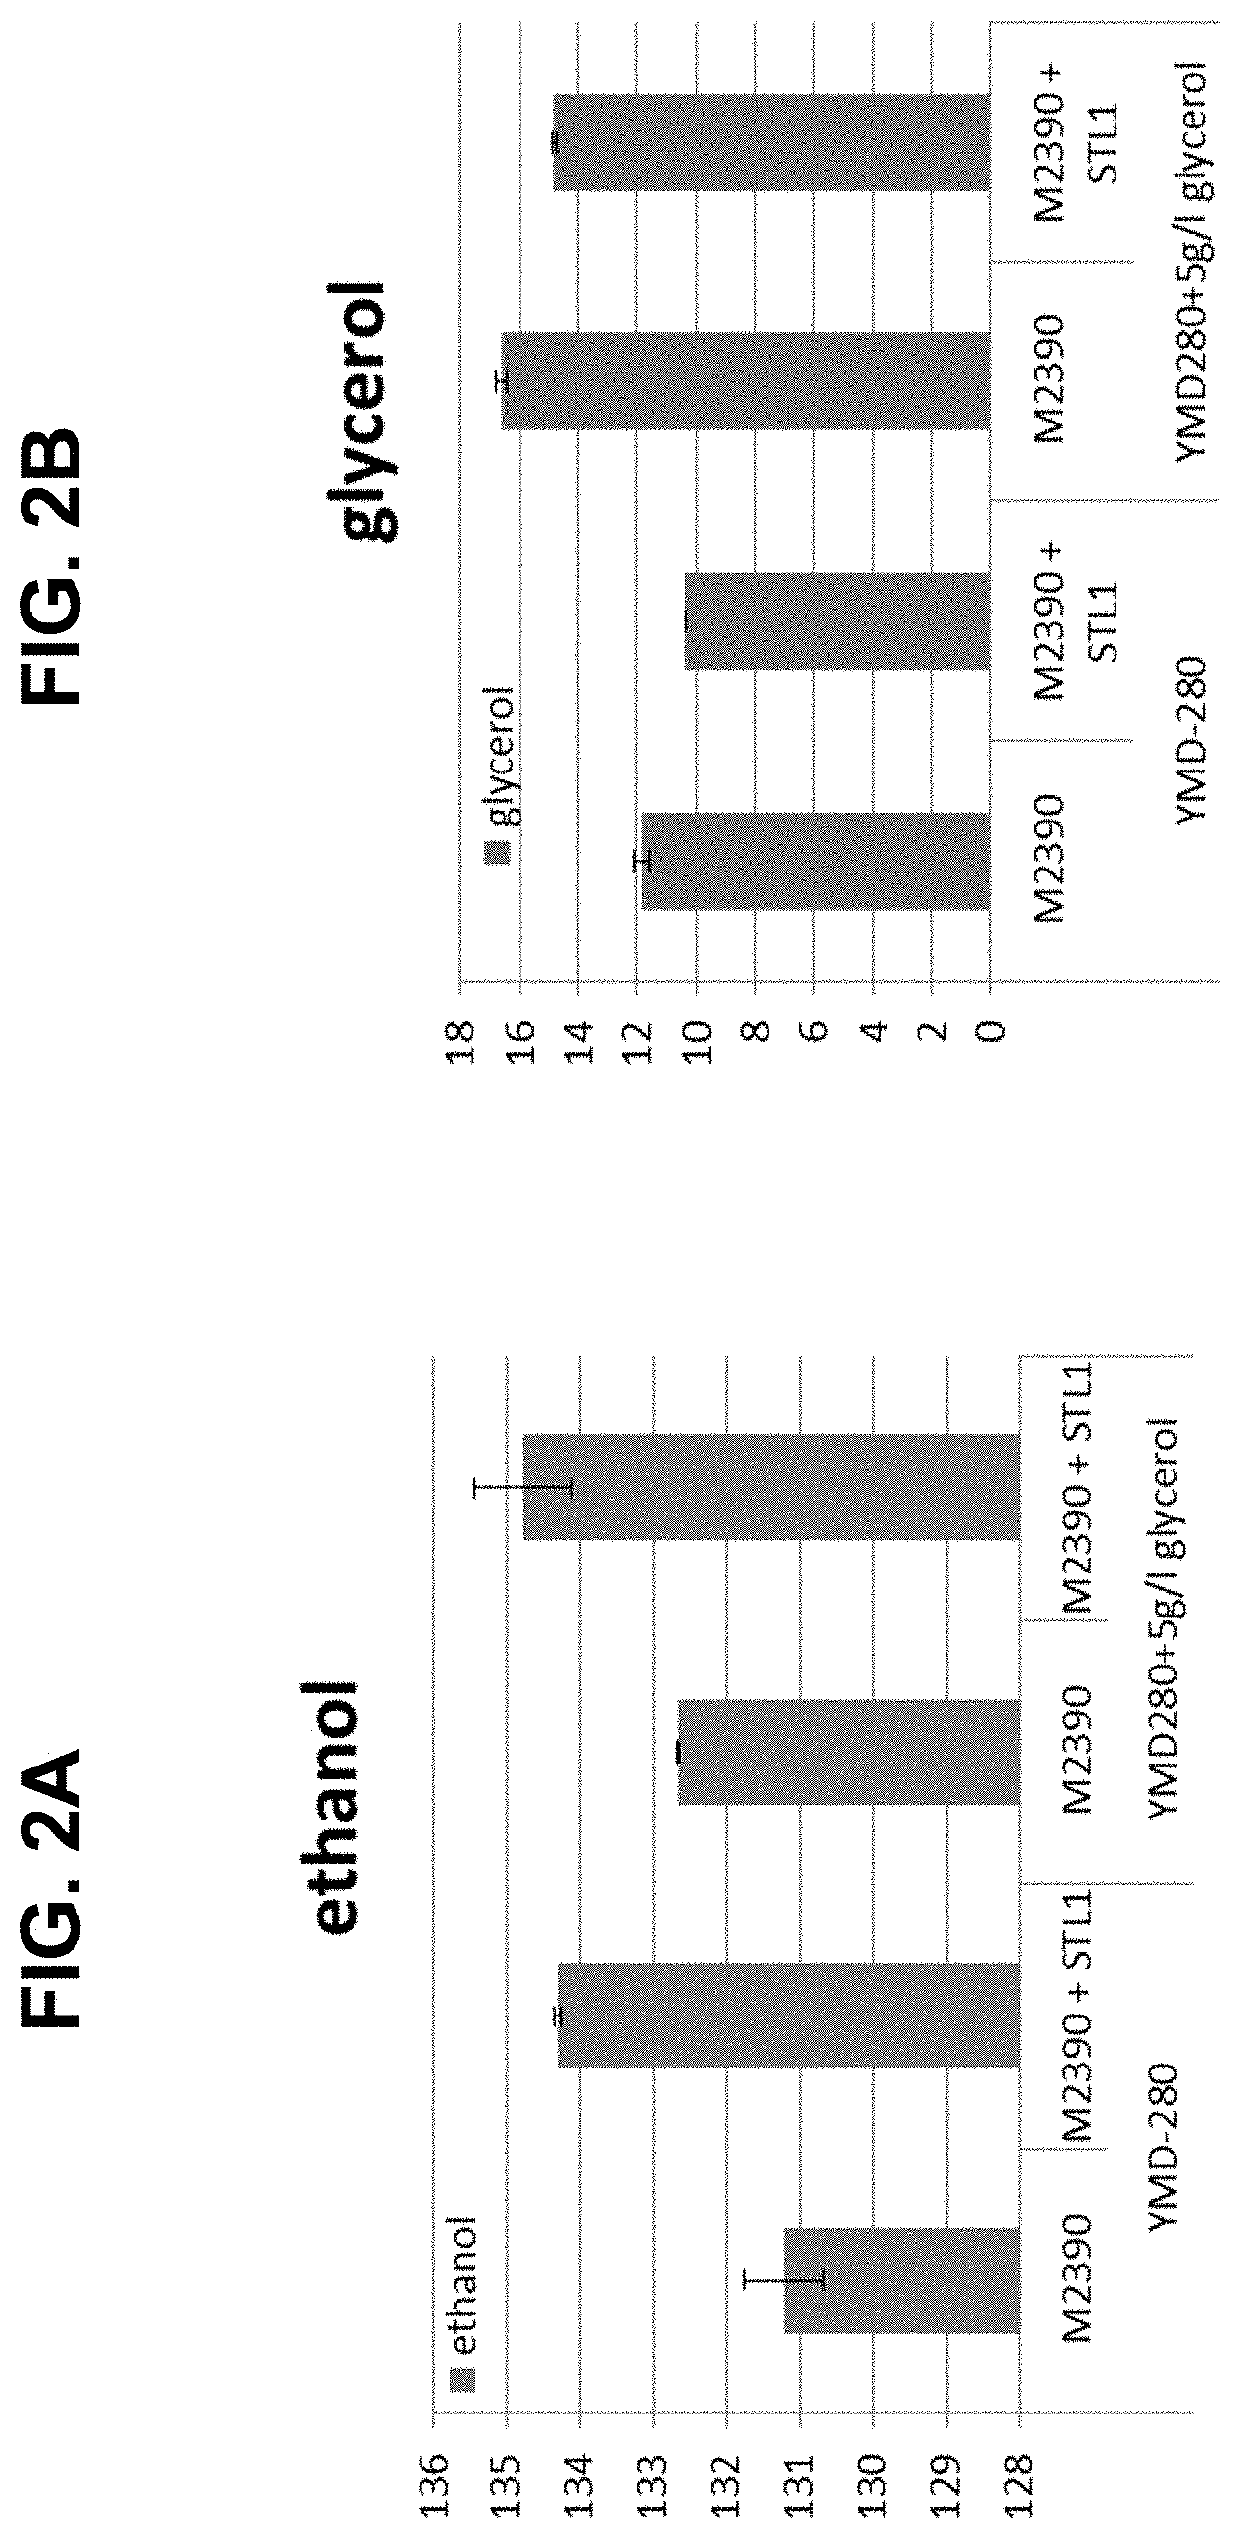 Methods for producing isopropanol and acetone in a microorganism